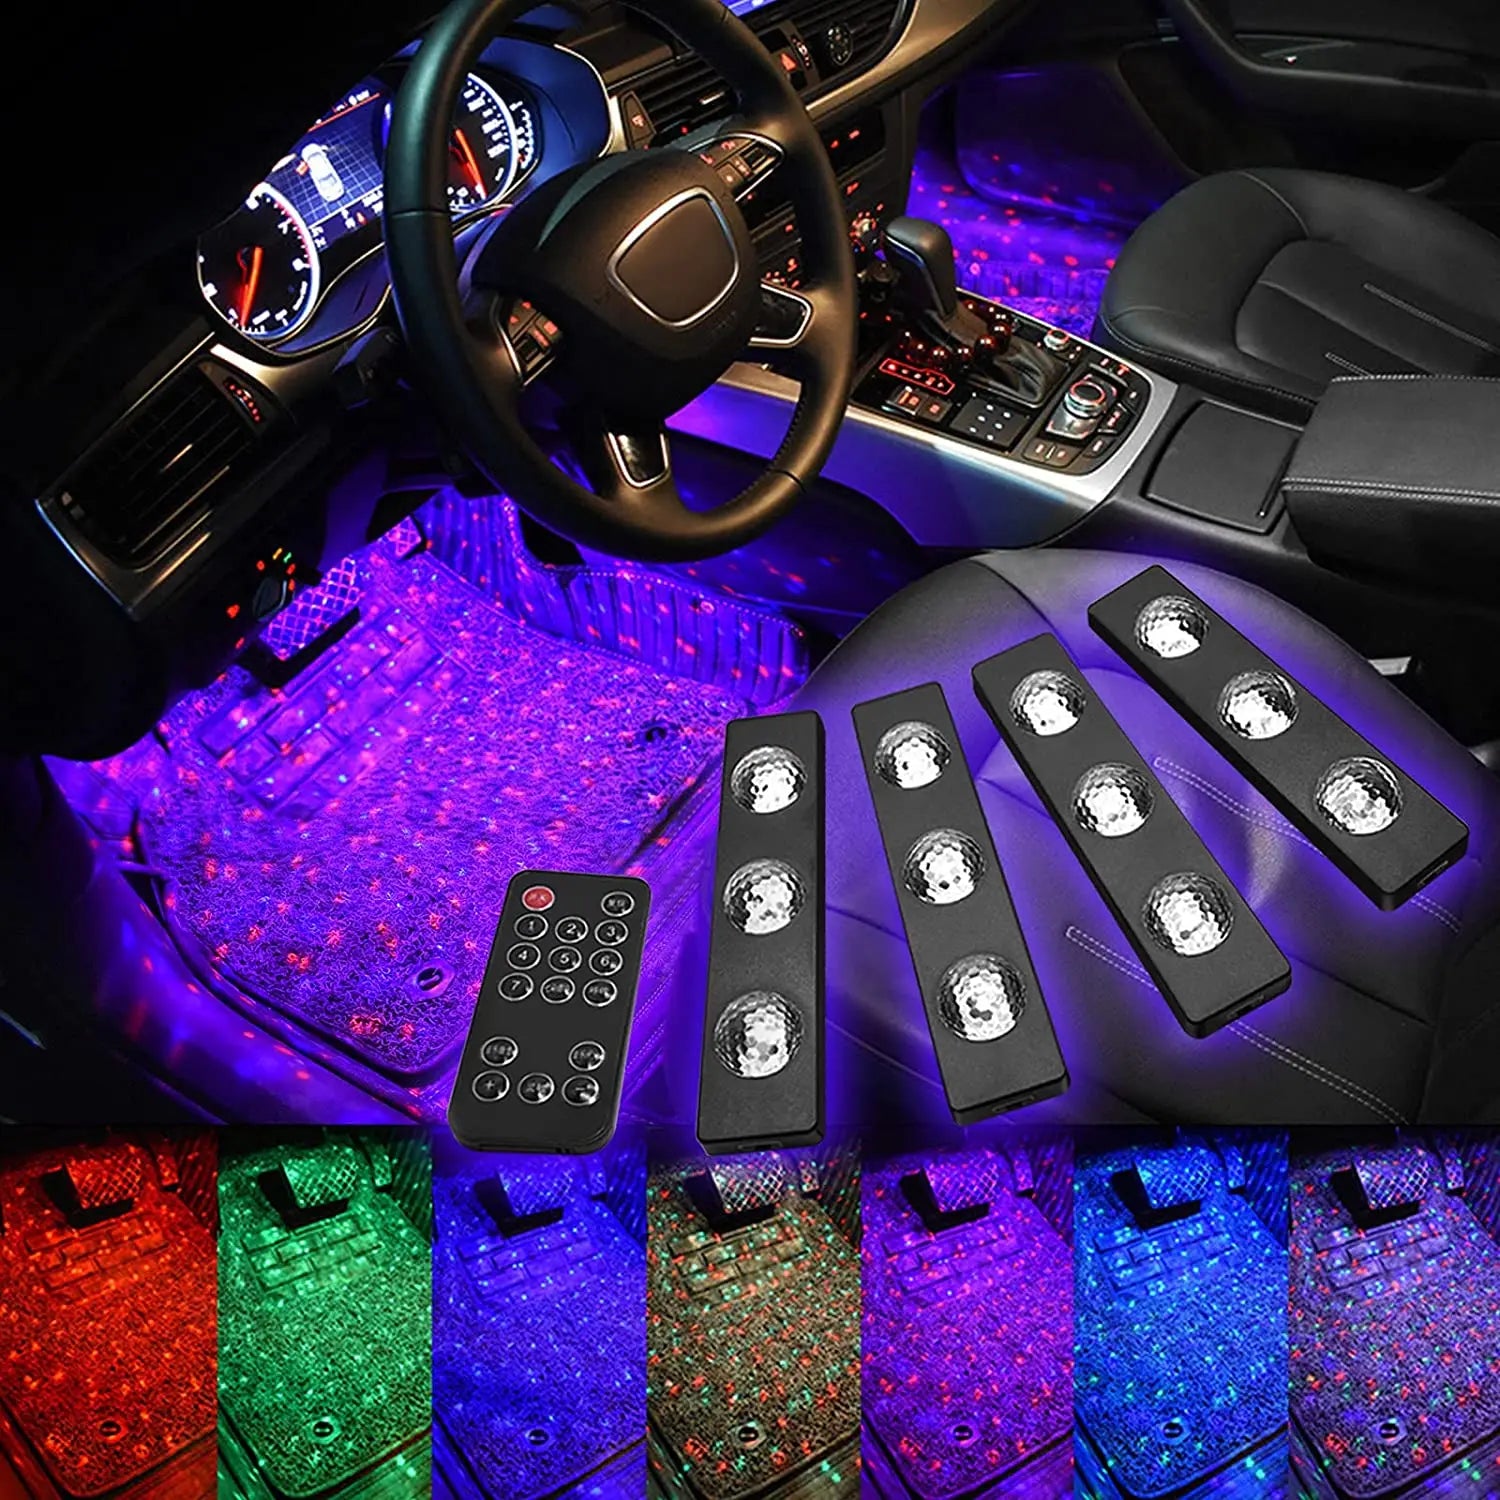 FLASHARK Car Interior LED Ambient Lights, USB Plug-in Stars Atmosphere Decorative Muti-Color Light underdash for Any Carpet Lighting kit (4 Packs with Remote and Sound Control) Flashark